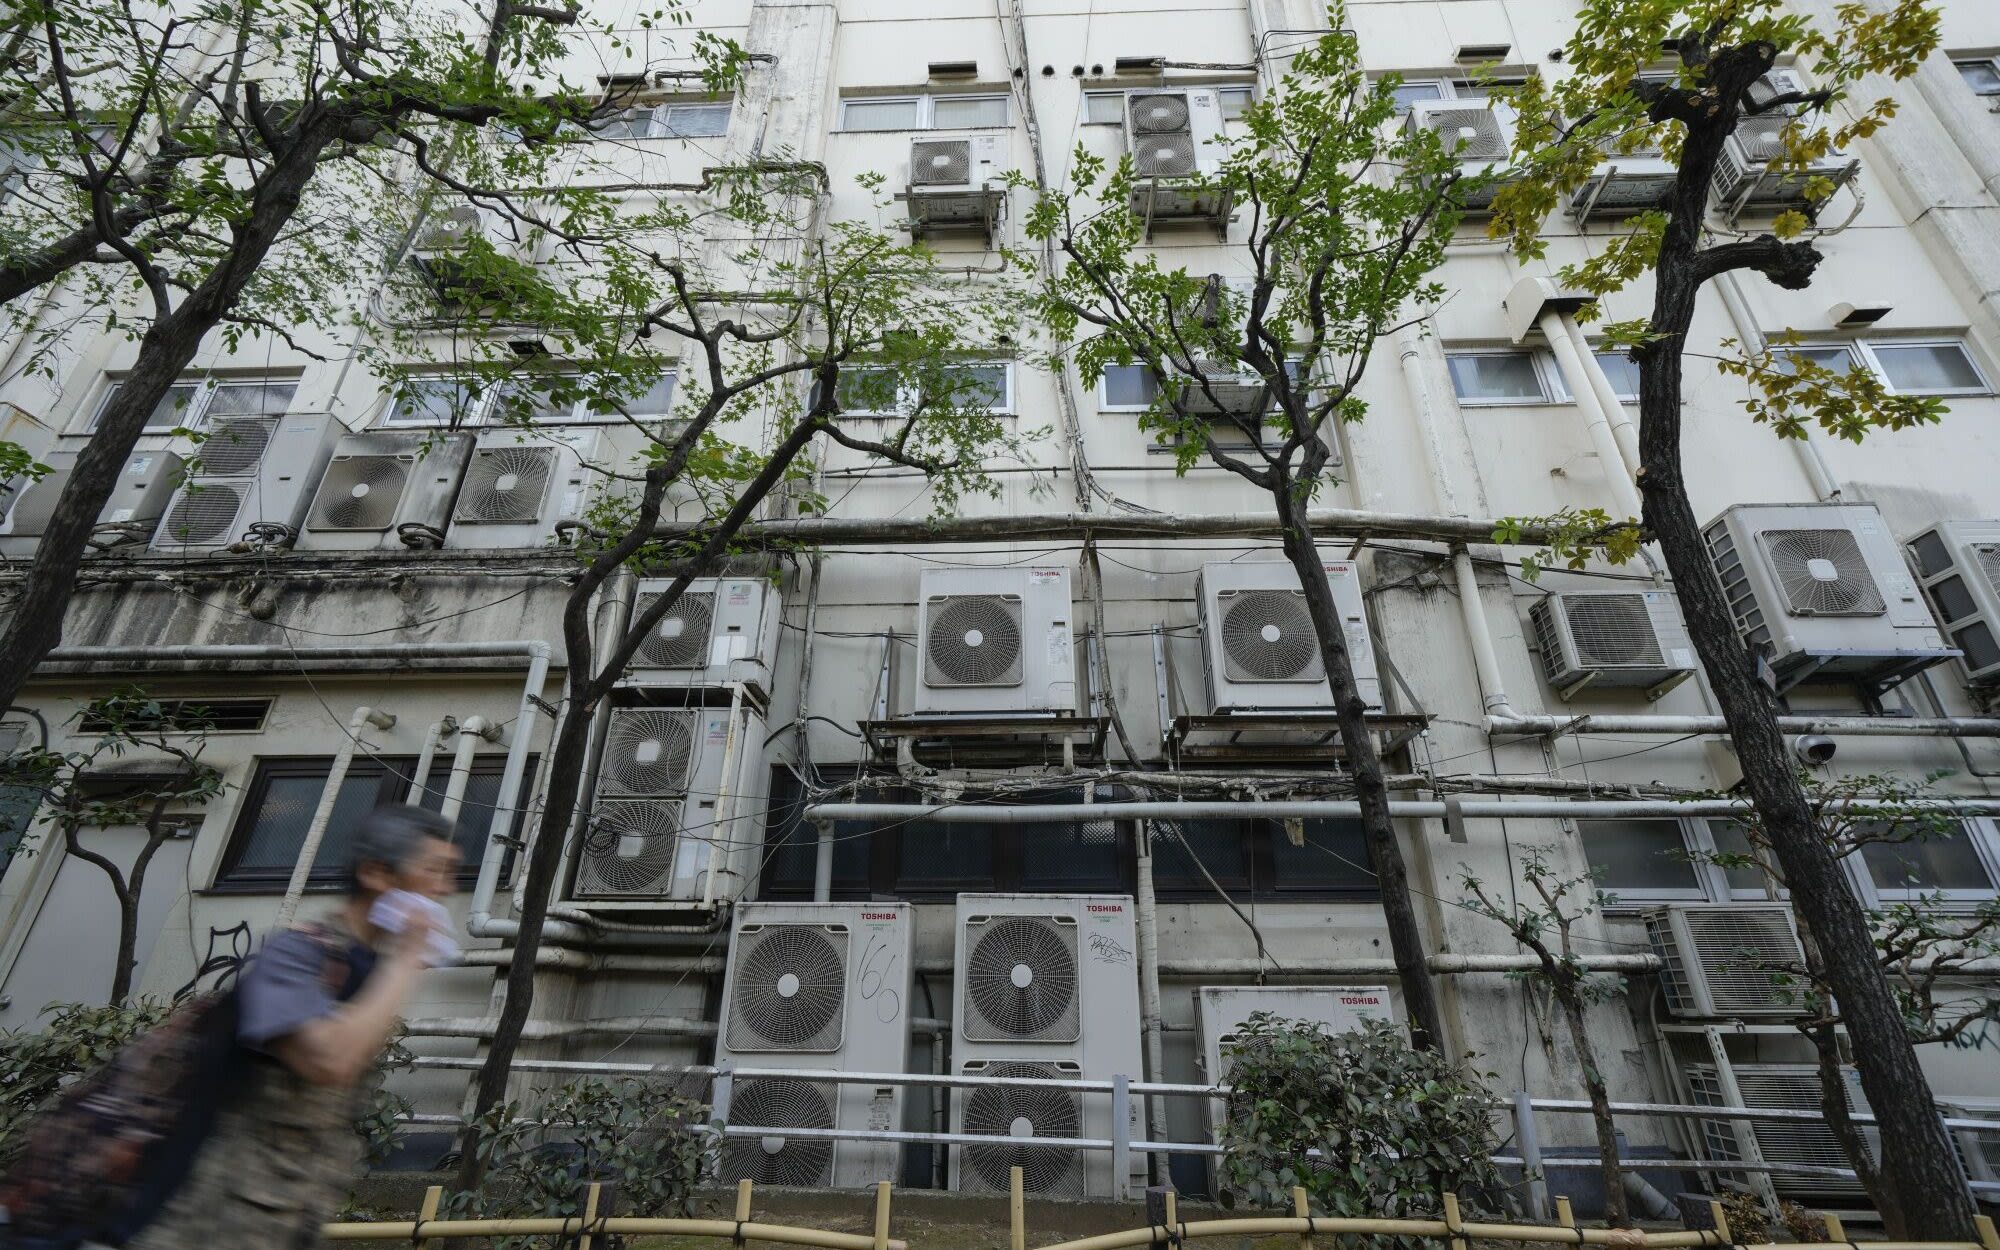 Luxury or lifeline? Why a lack of air conditioning can be deadly